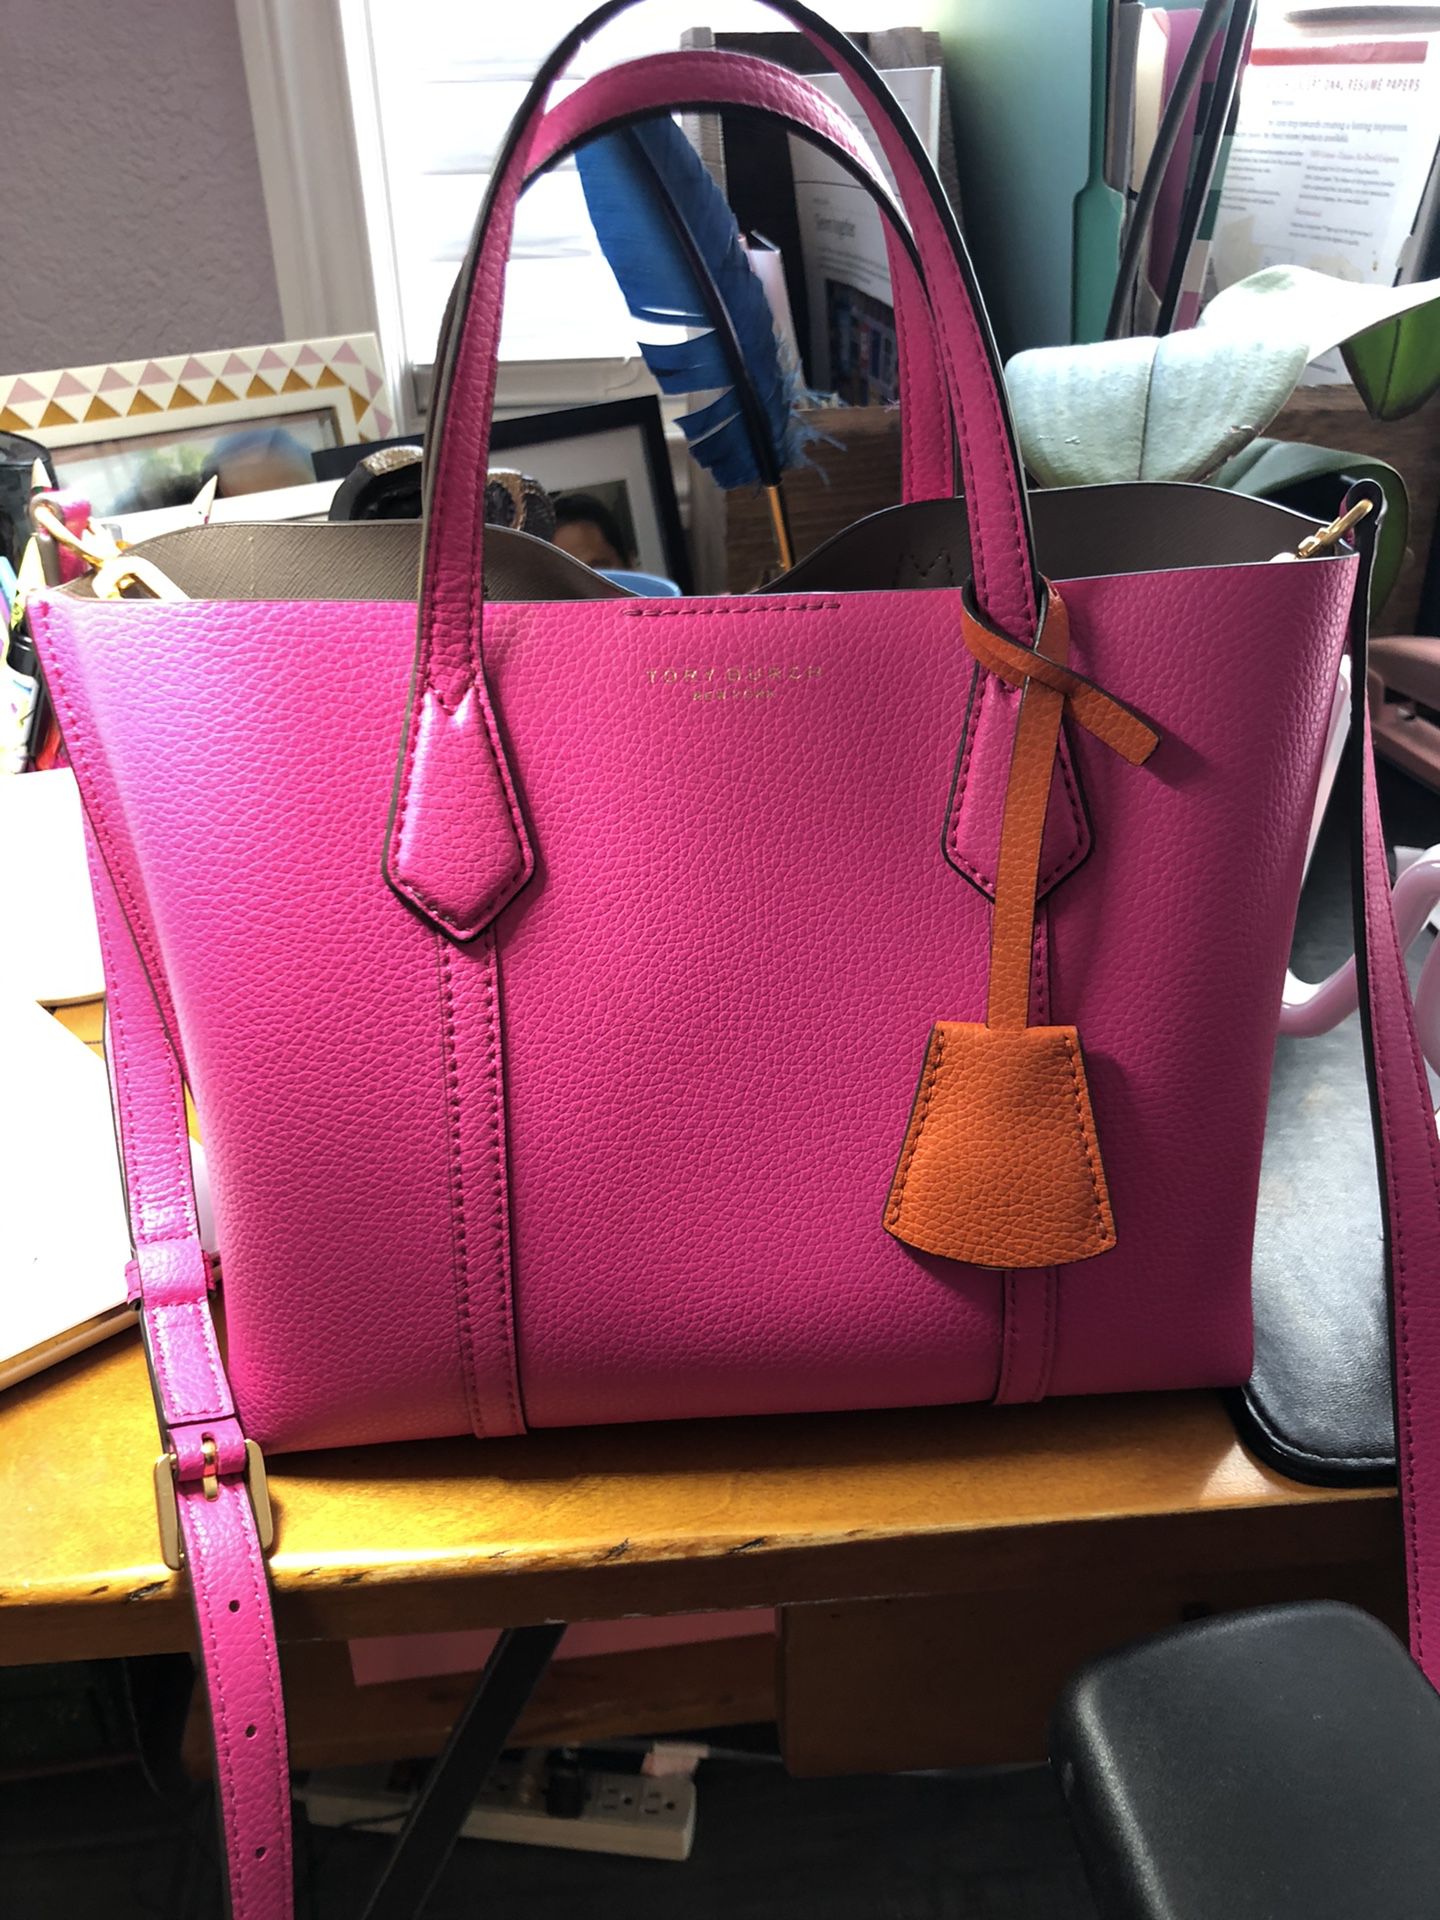 Tory Burch Tote, Crazy Pink for Spring and Brand New!